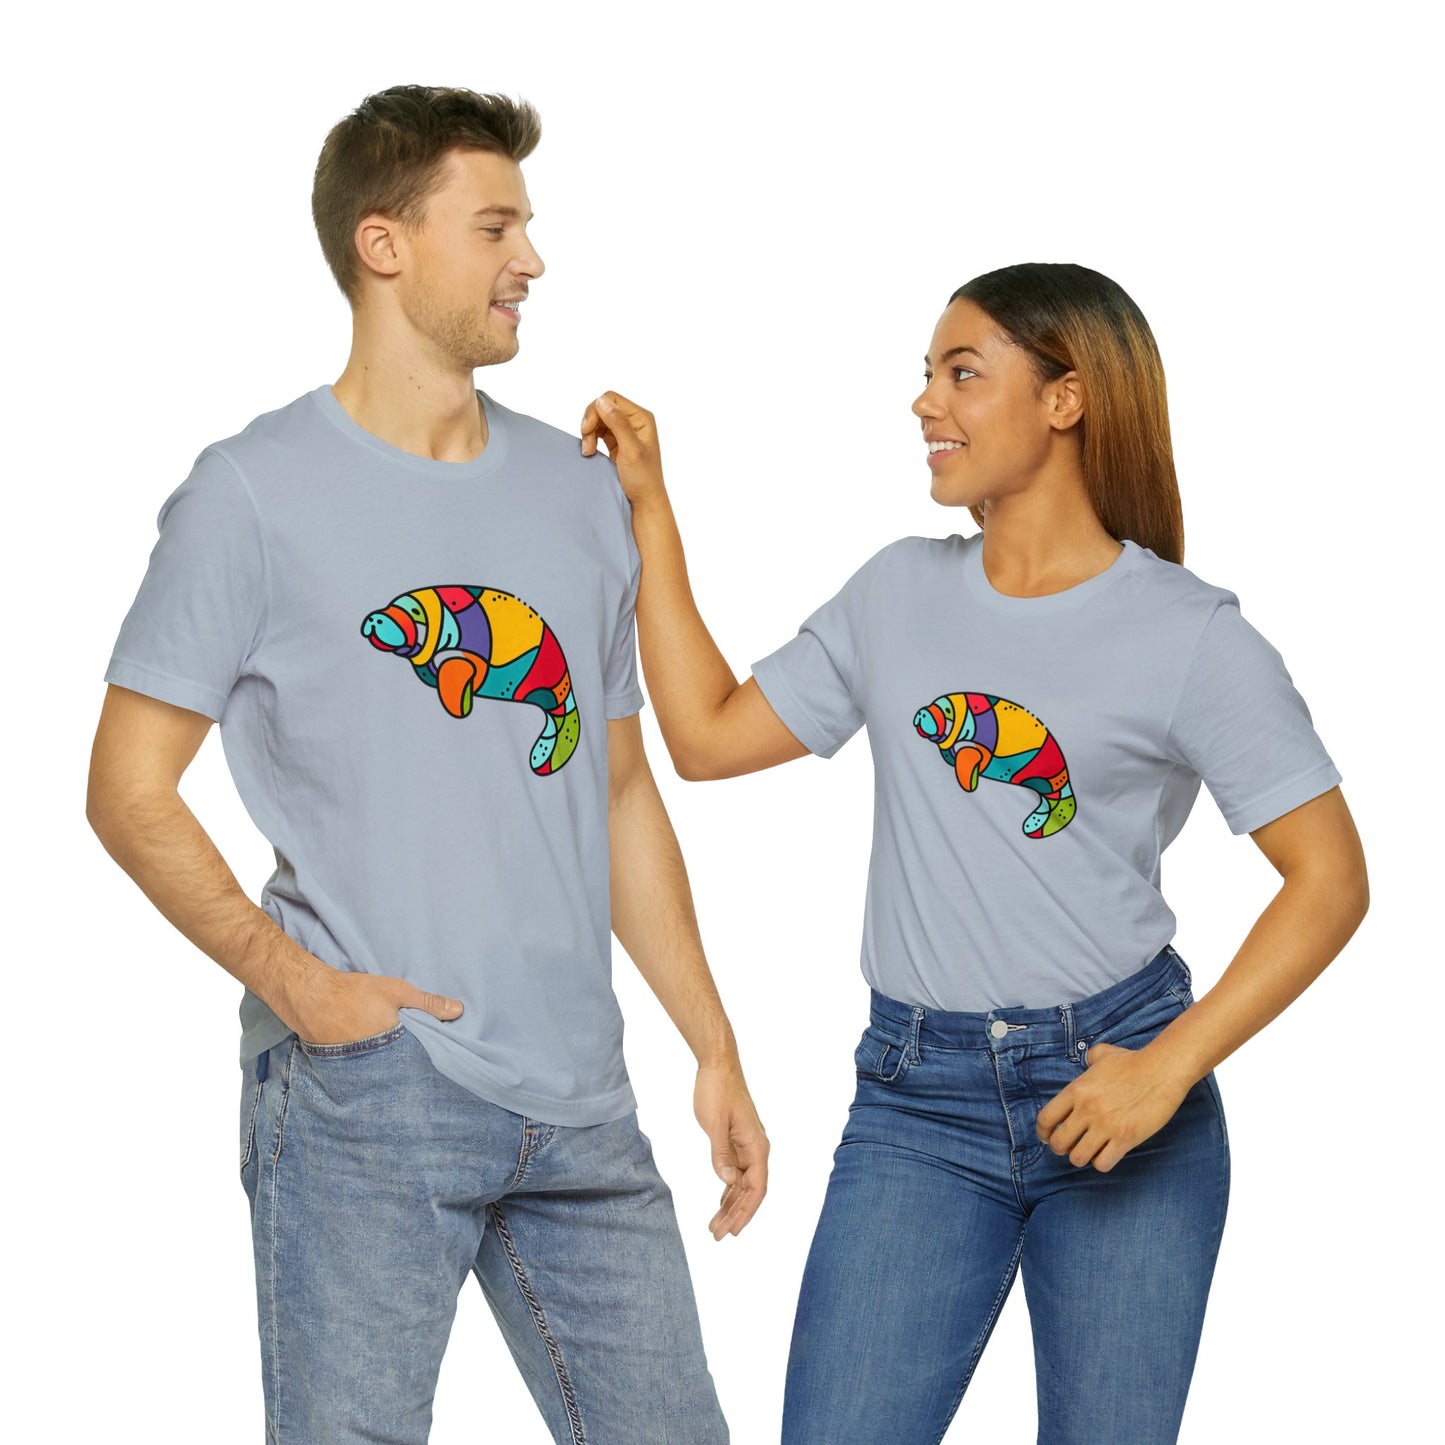 Manatee Whimsiacle - Snazzle Tee